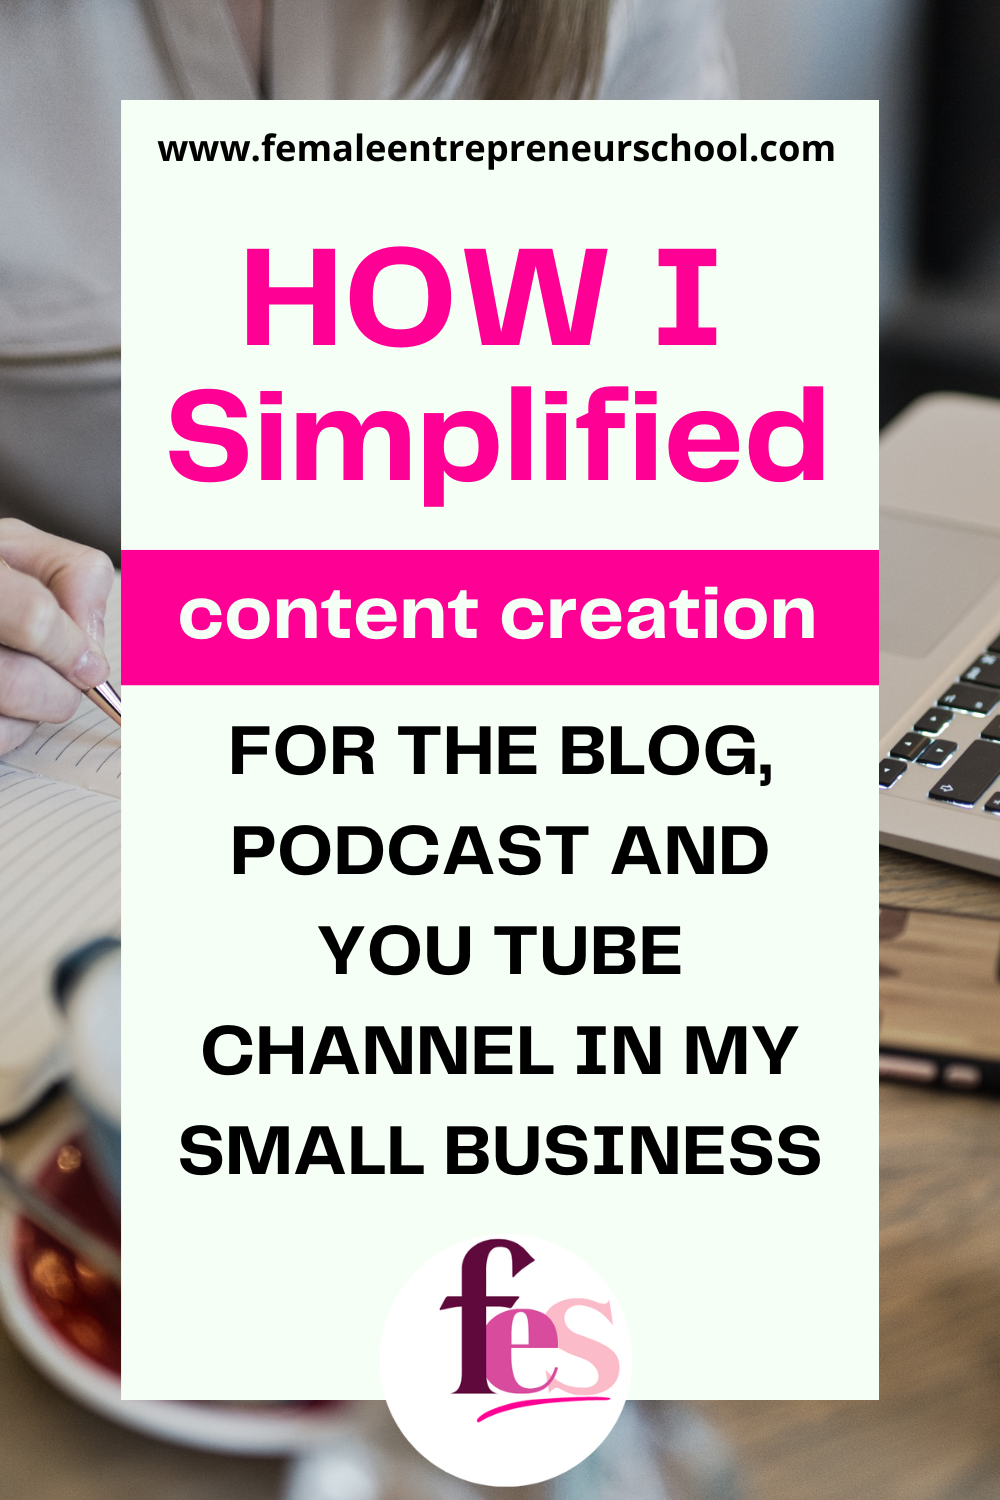 How I simplified content creation for the blog, podcast and you tube channel in my small business - text on cream background with image of computer on desk behind